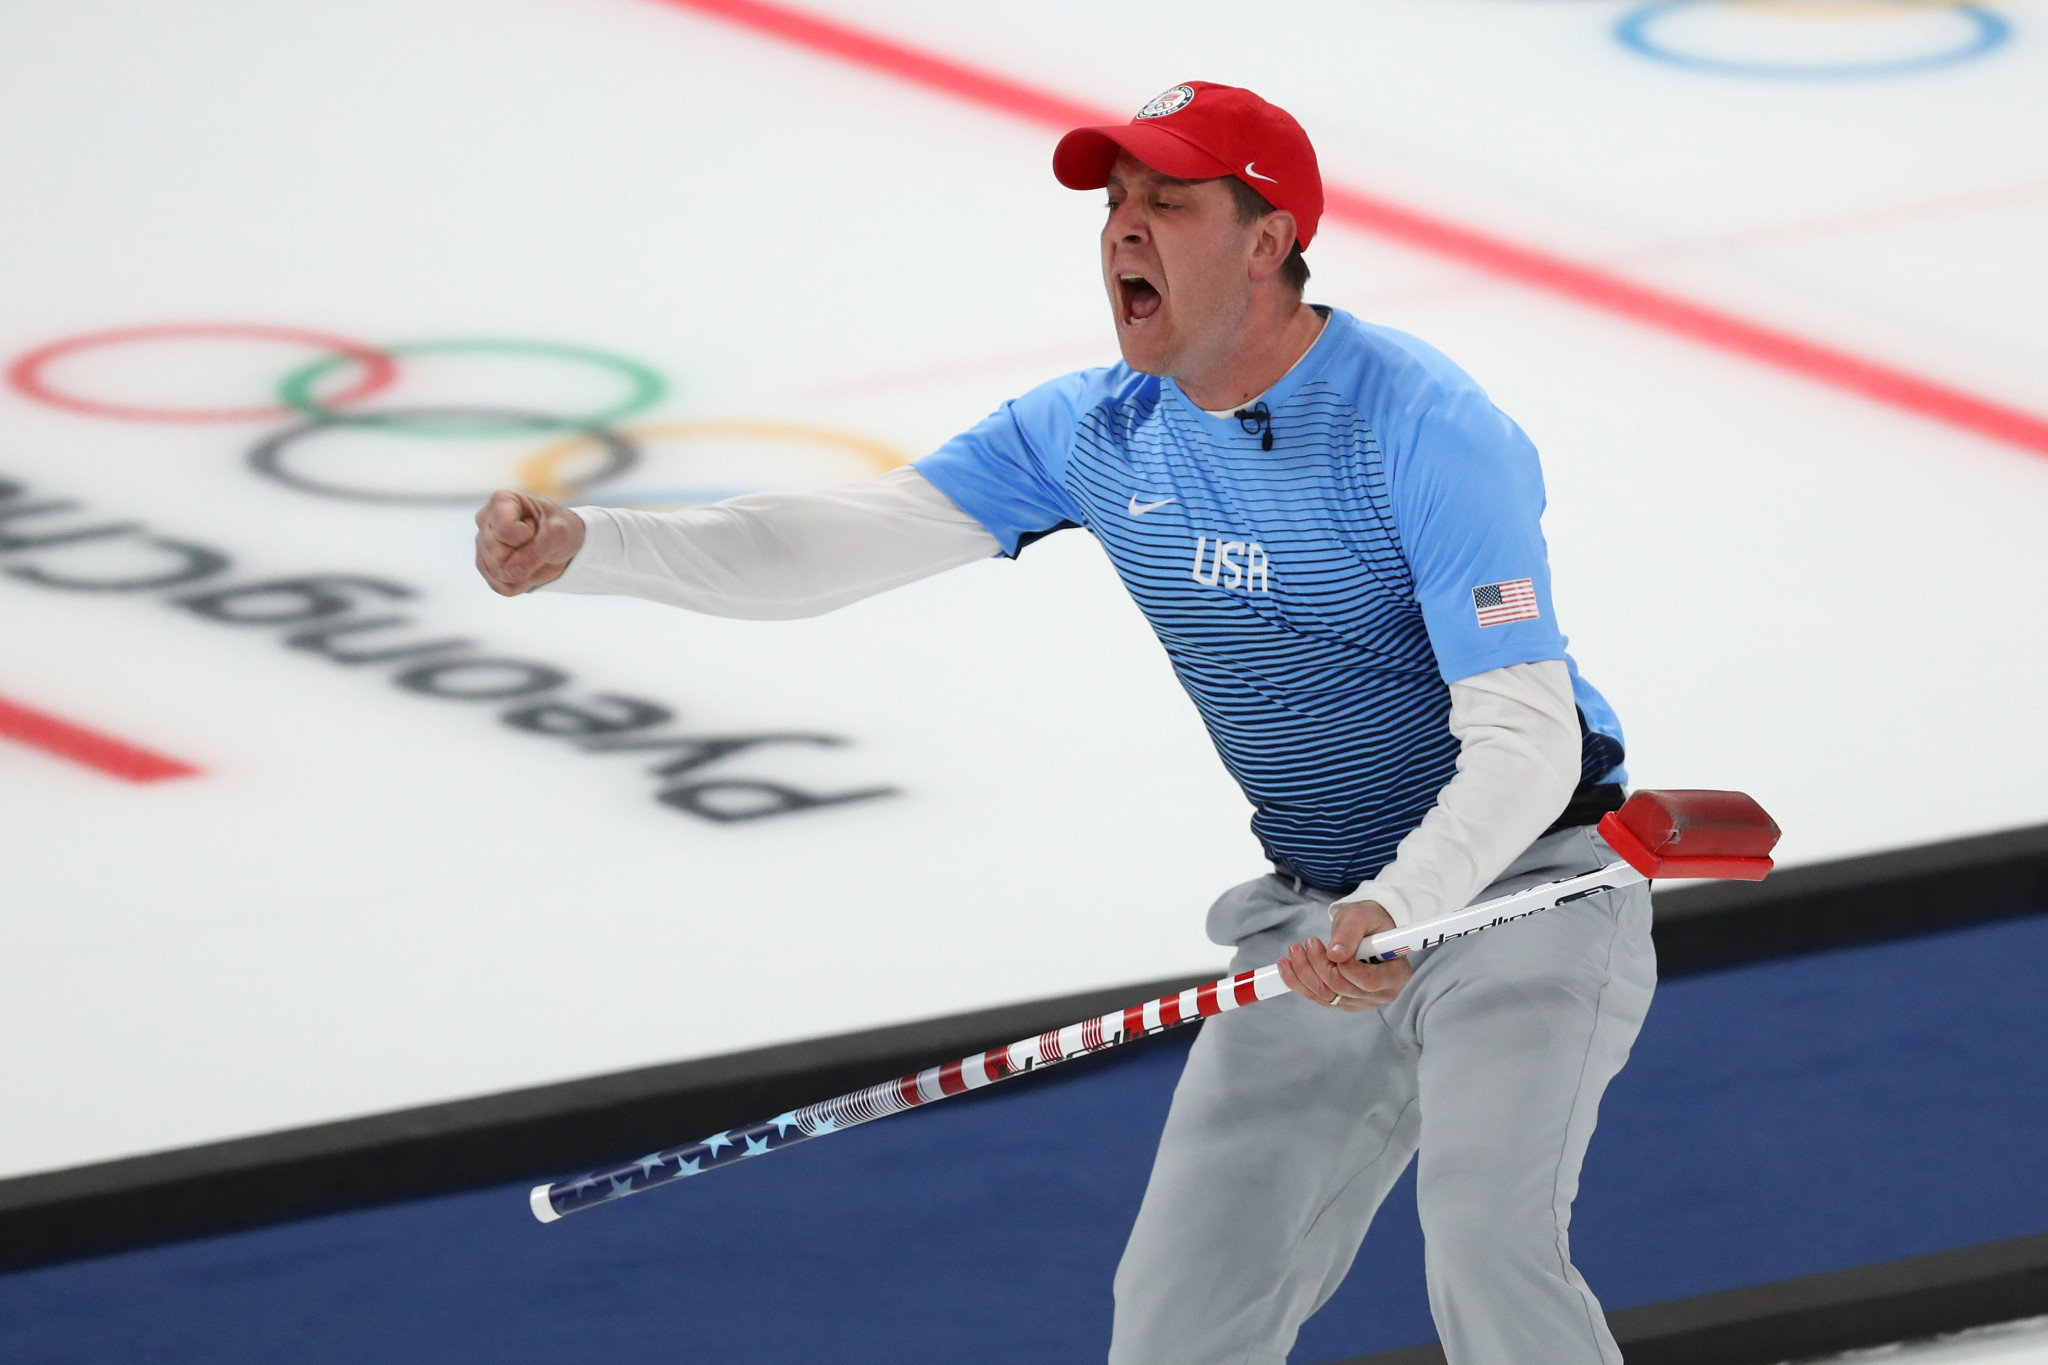  John Shuster won Olympic gold for the US at Pyeongchang 2018 ©Getty Images